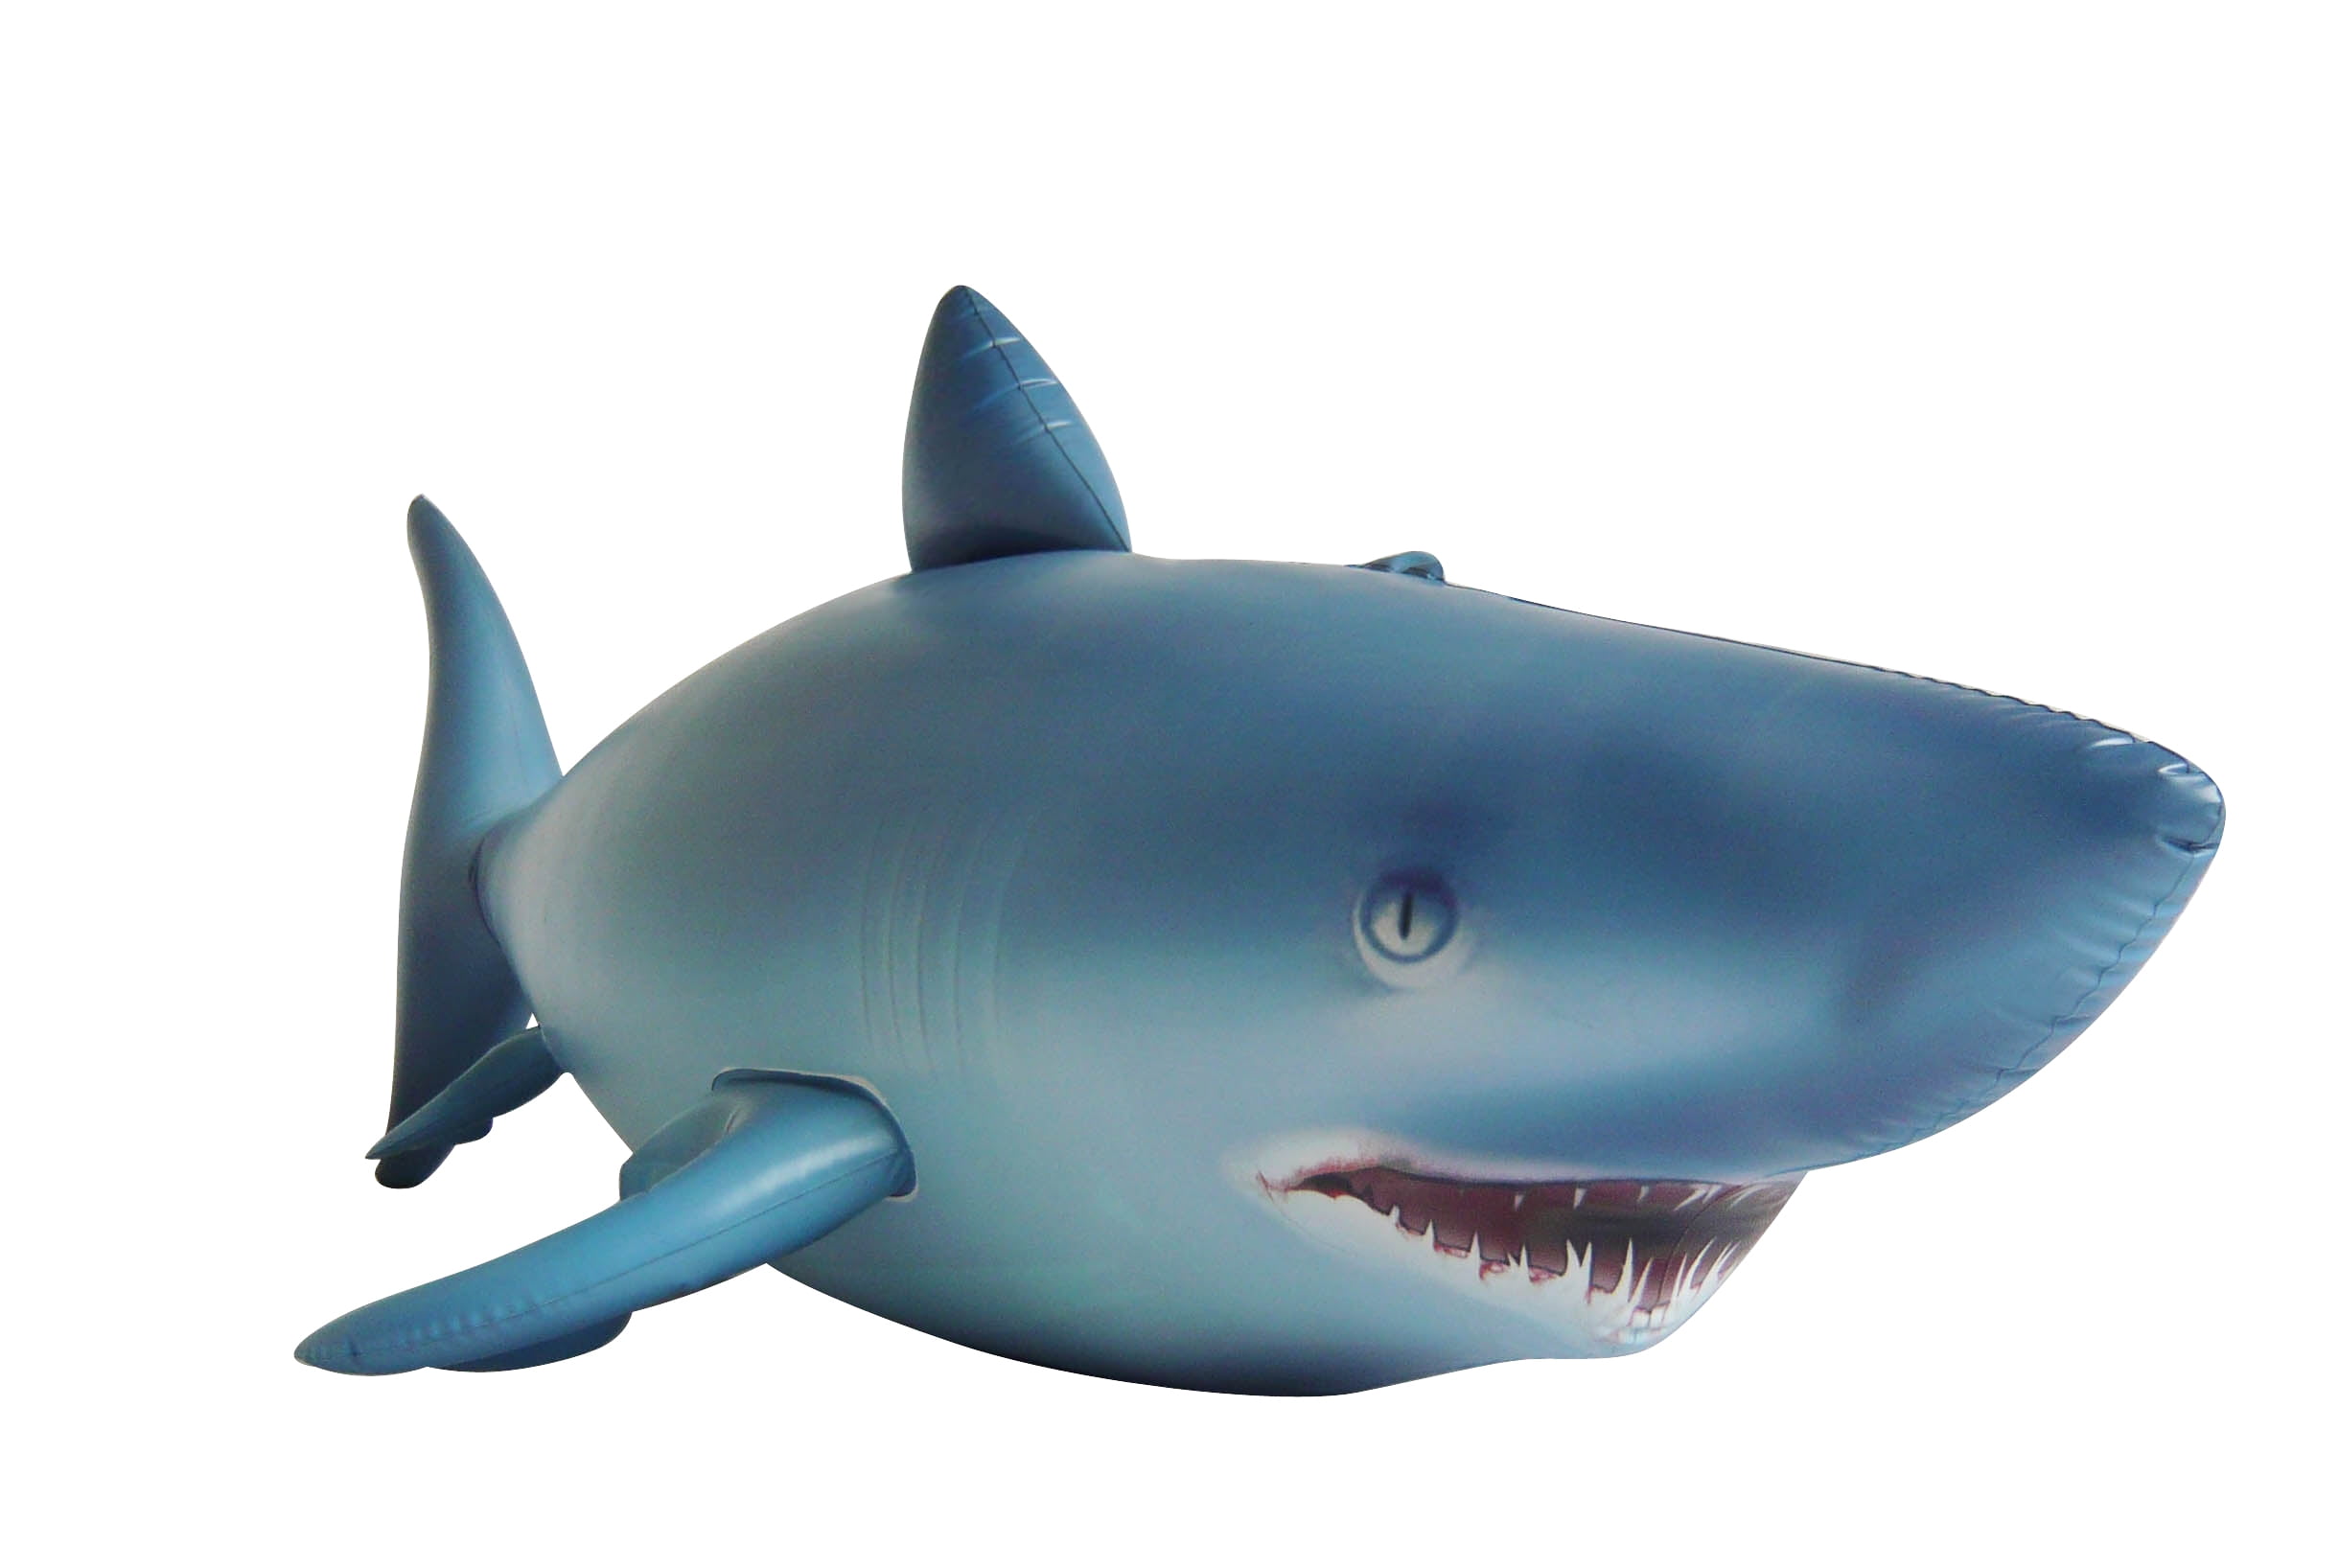 Shark Inflatable Life like 84 inches Long party photo prop gift novelty by  Jet Creations AL-SHARK 